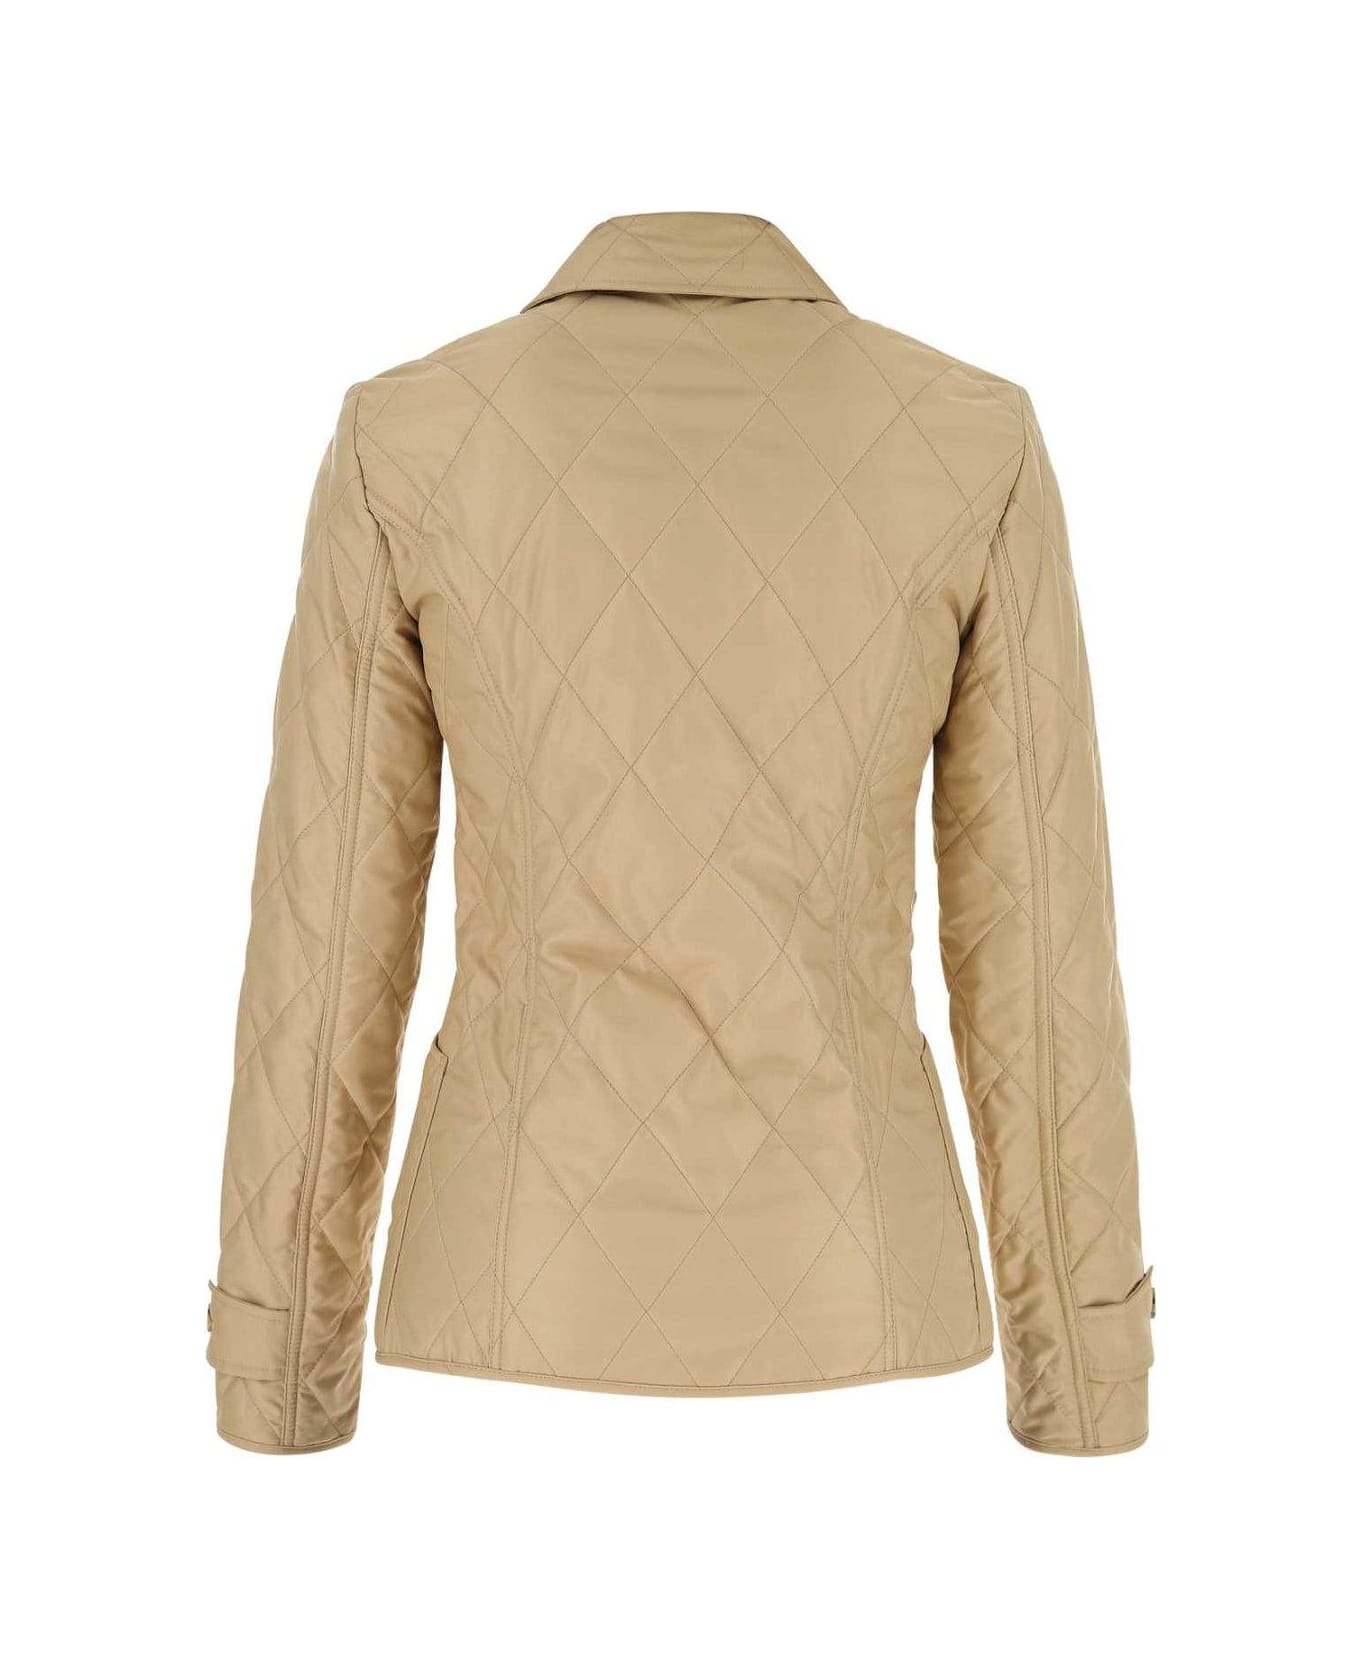 Burberry Quilted Thermoregulated Jacket - NEUTRALS ジャケット